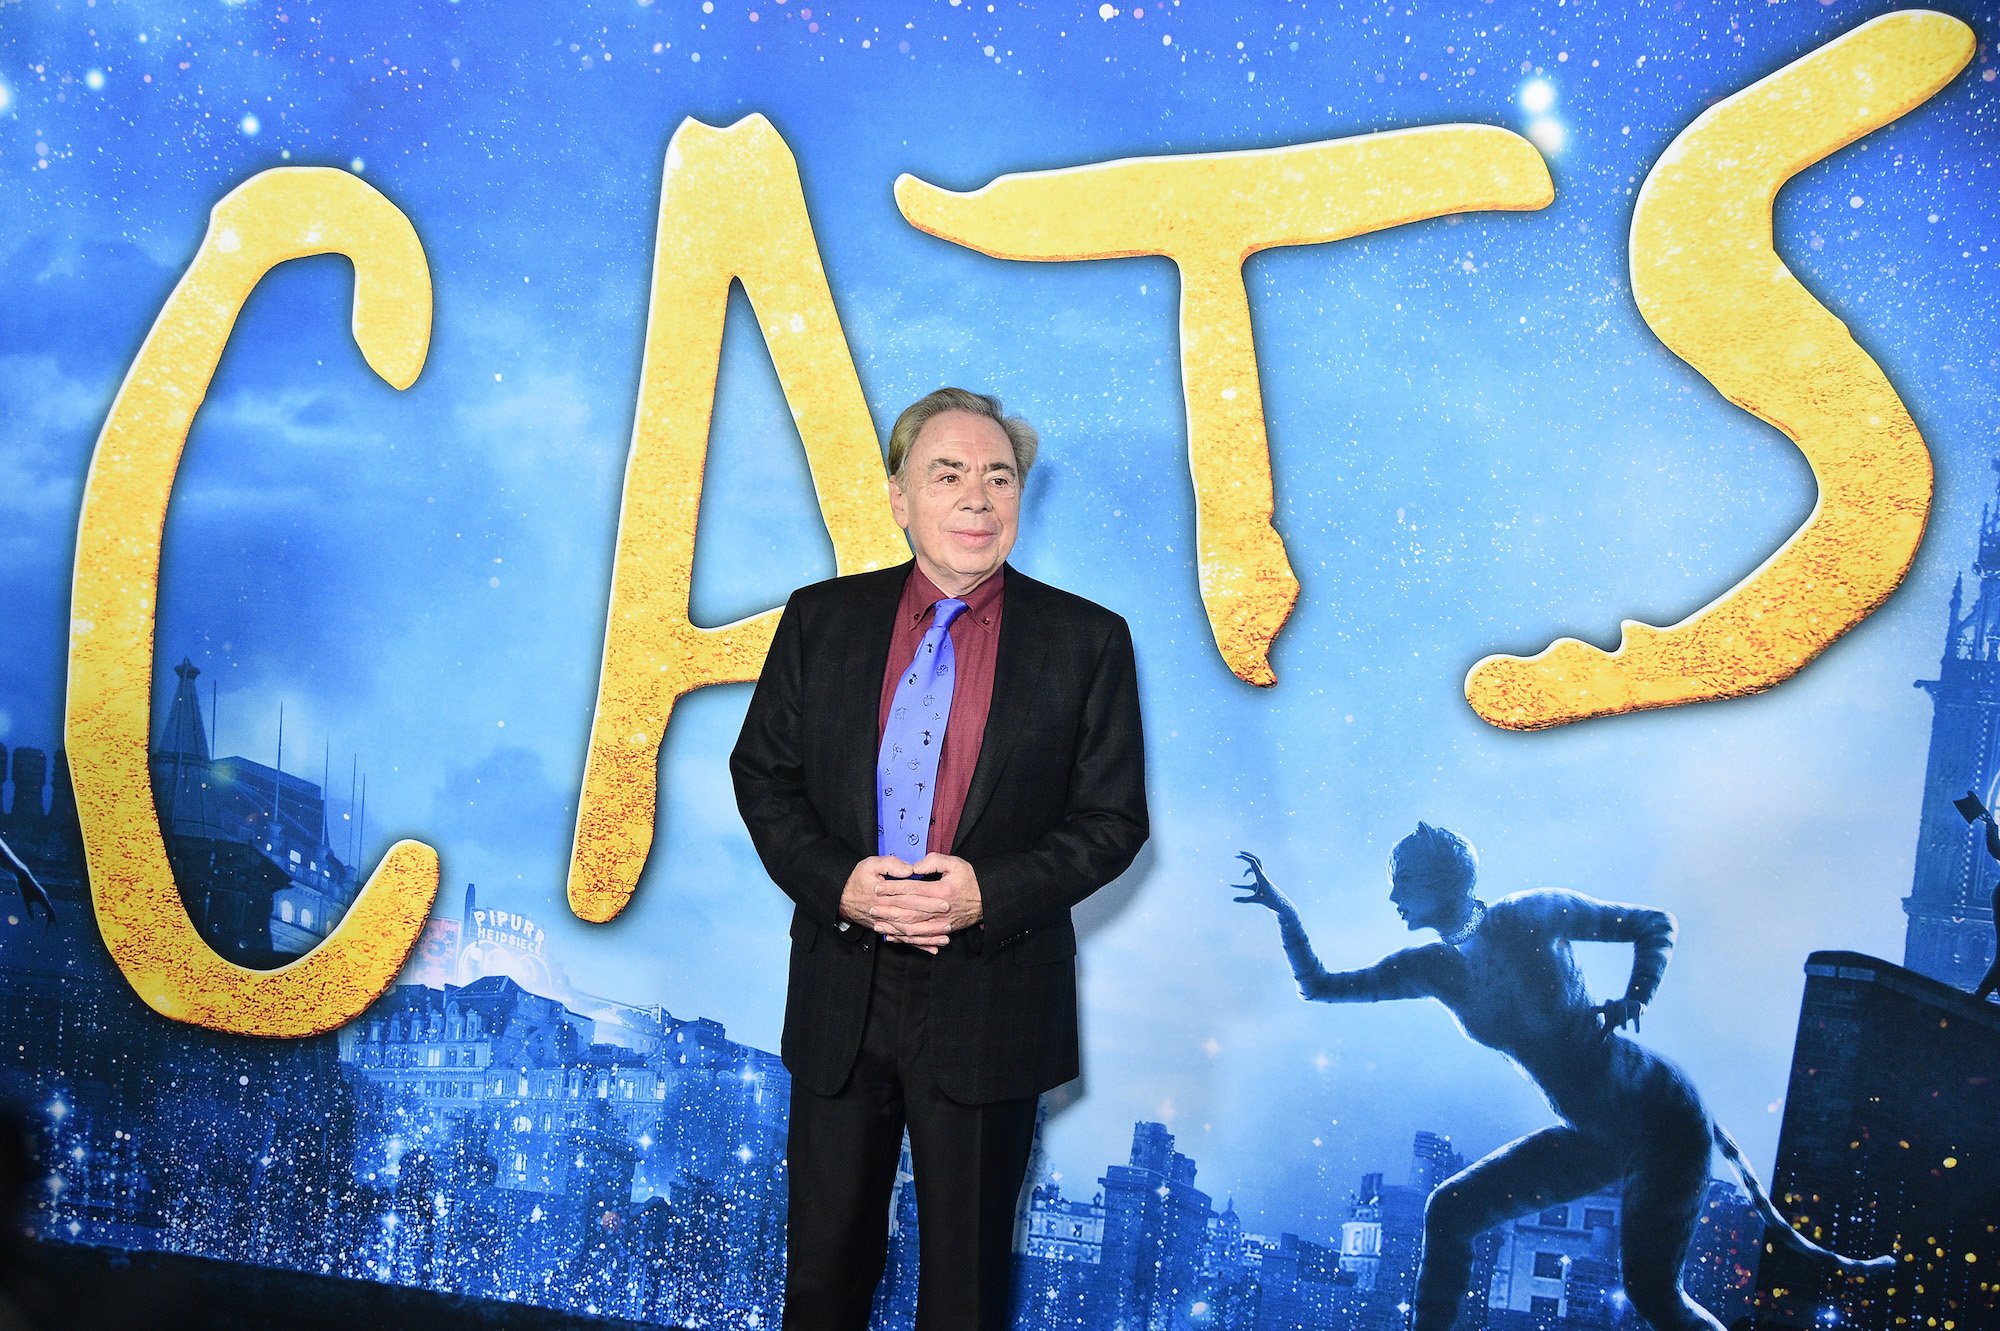 ‘Cats’ Composer Andrew Lloyd Webber Hated the Movie so Much, He Got a Dog